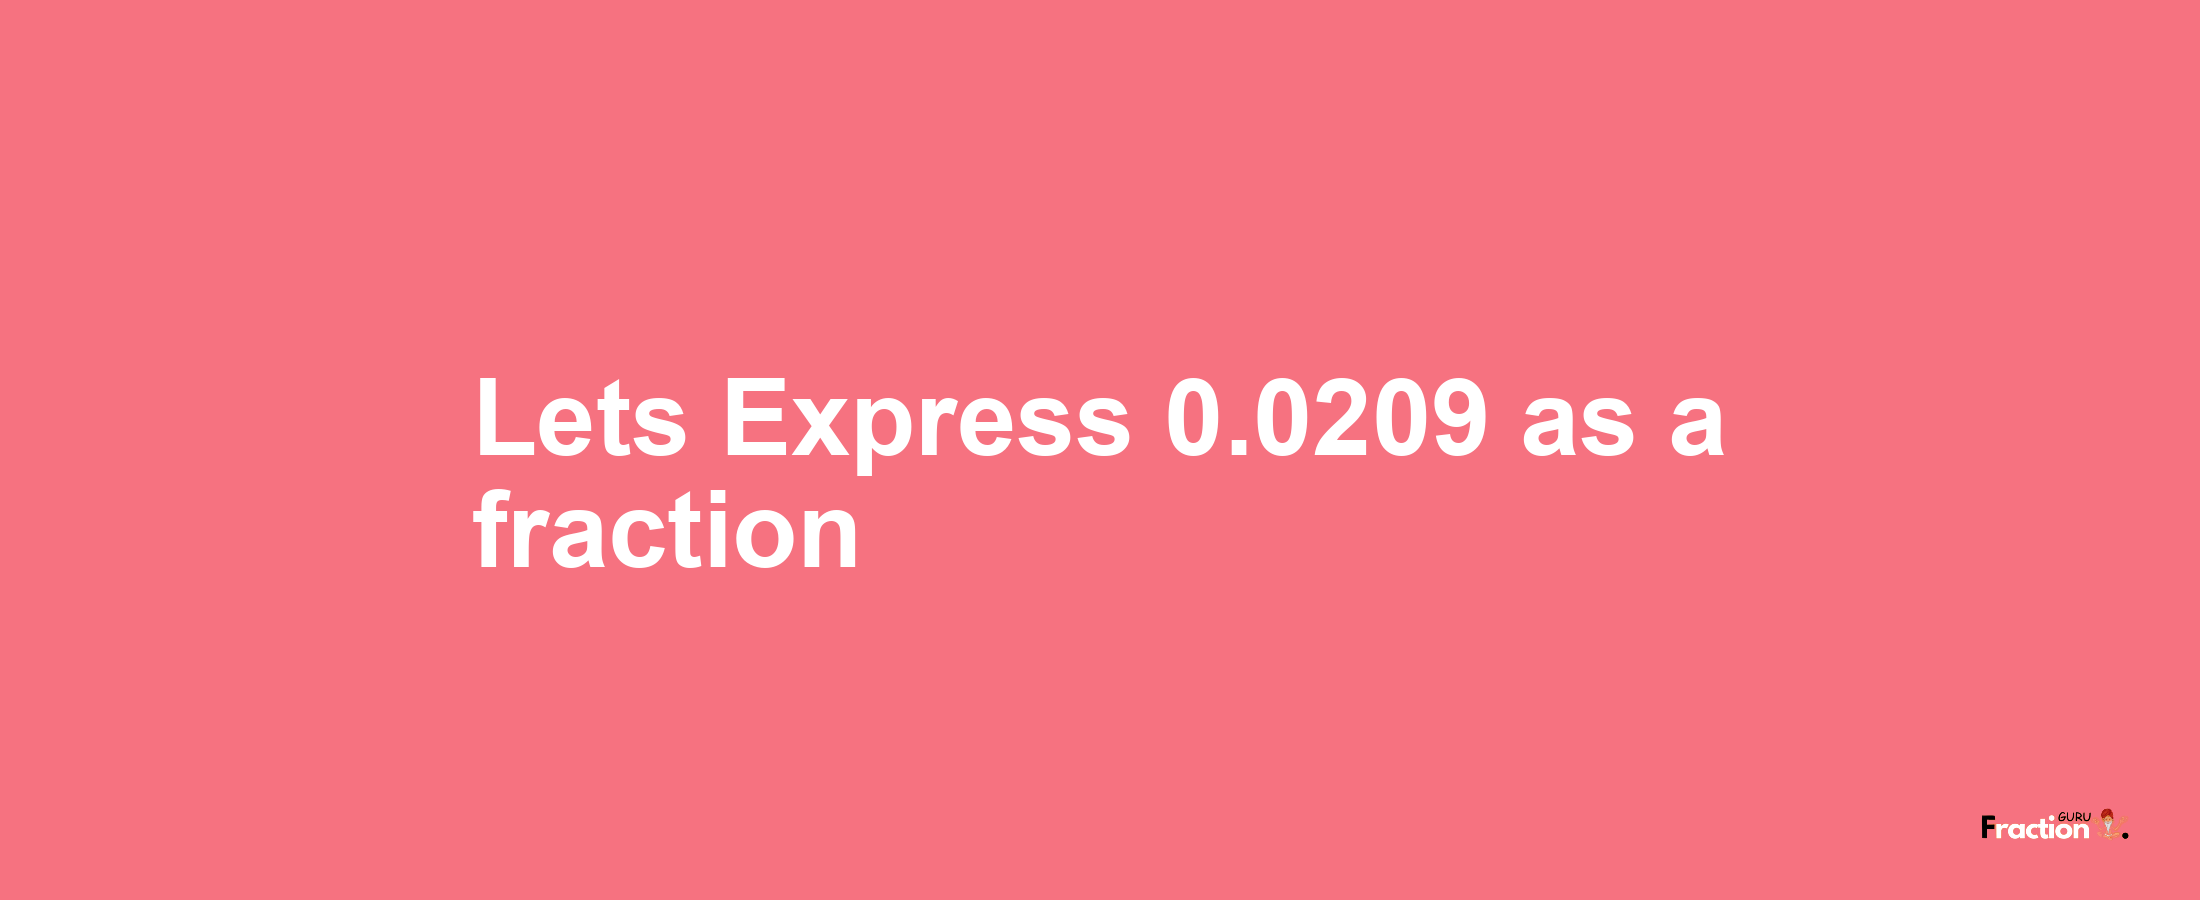 Lets Express 0.0209 as afraction